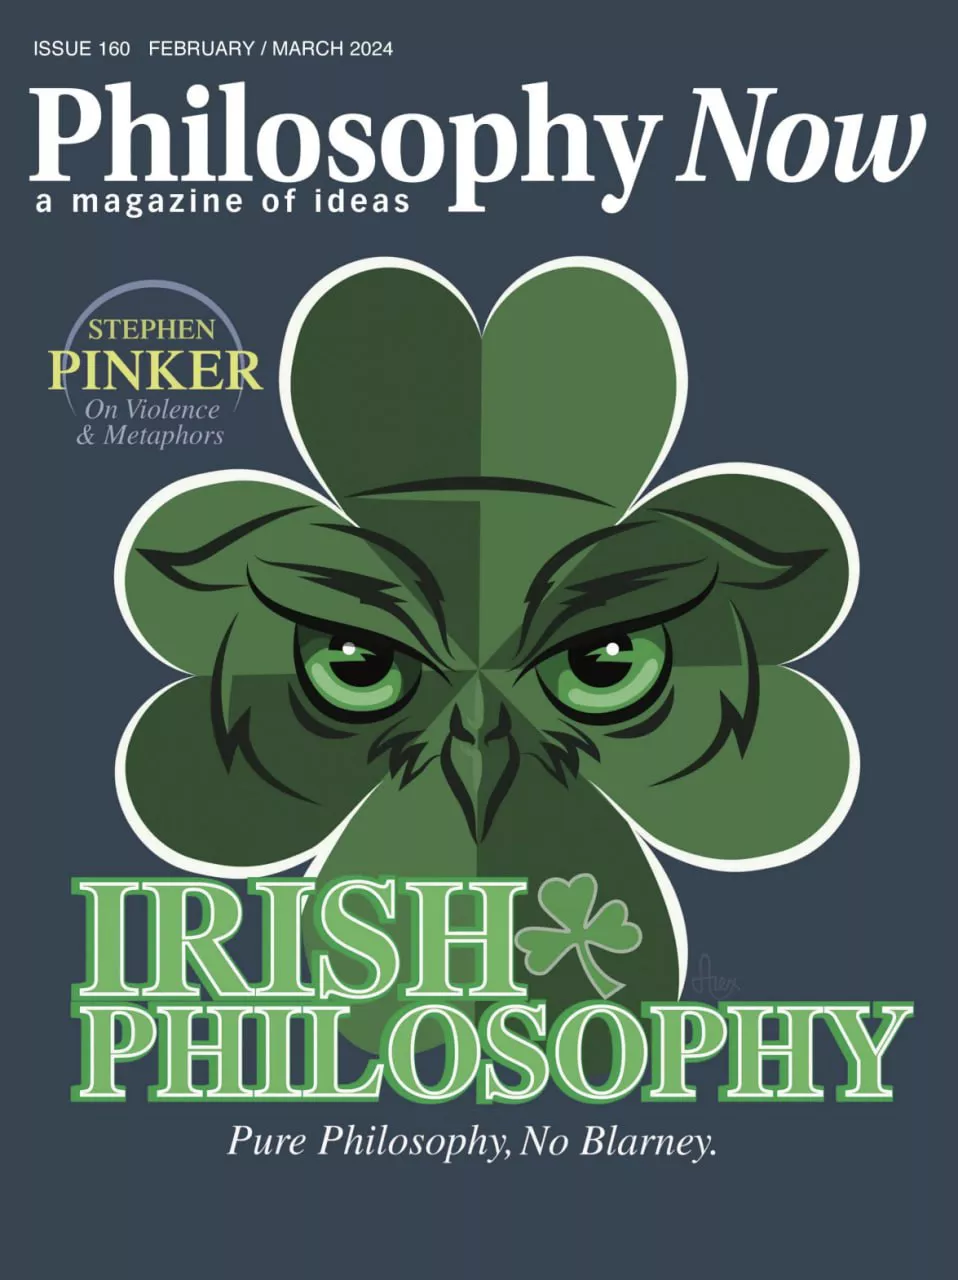 Philosophy Now - February March 2024 (philosophy)